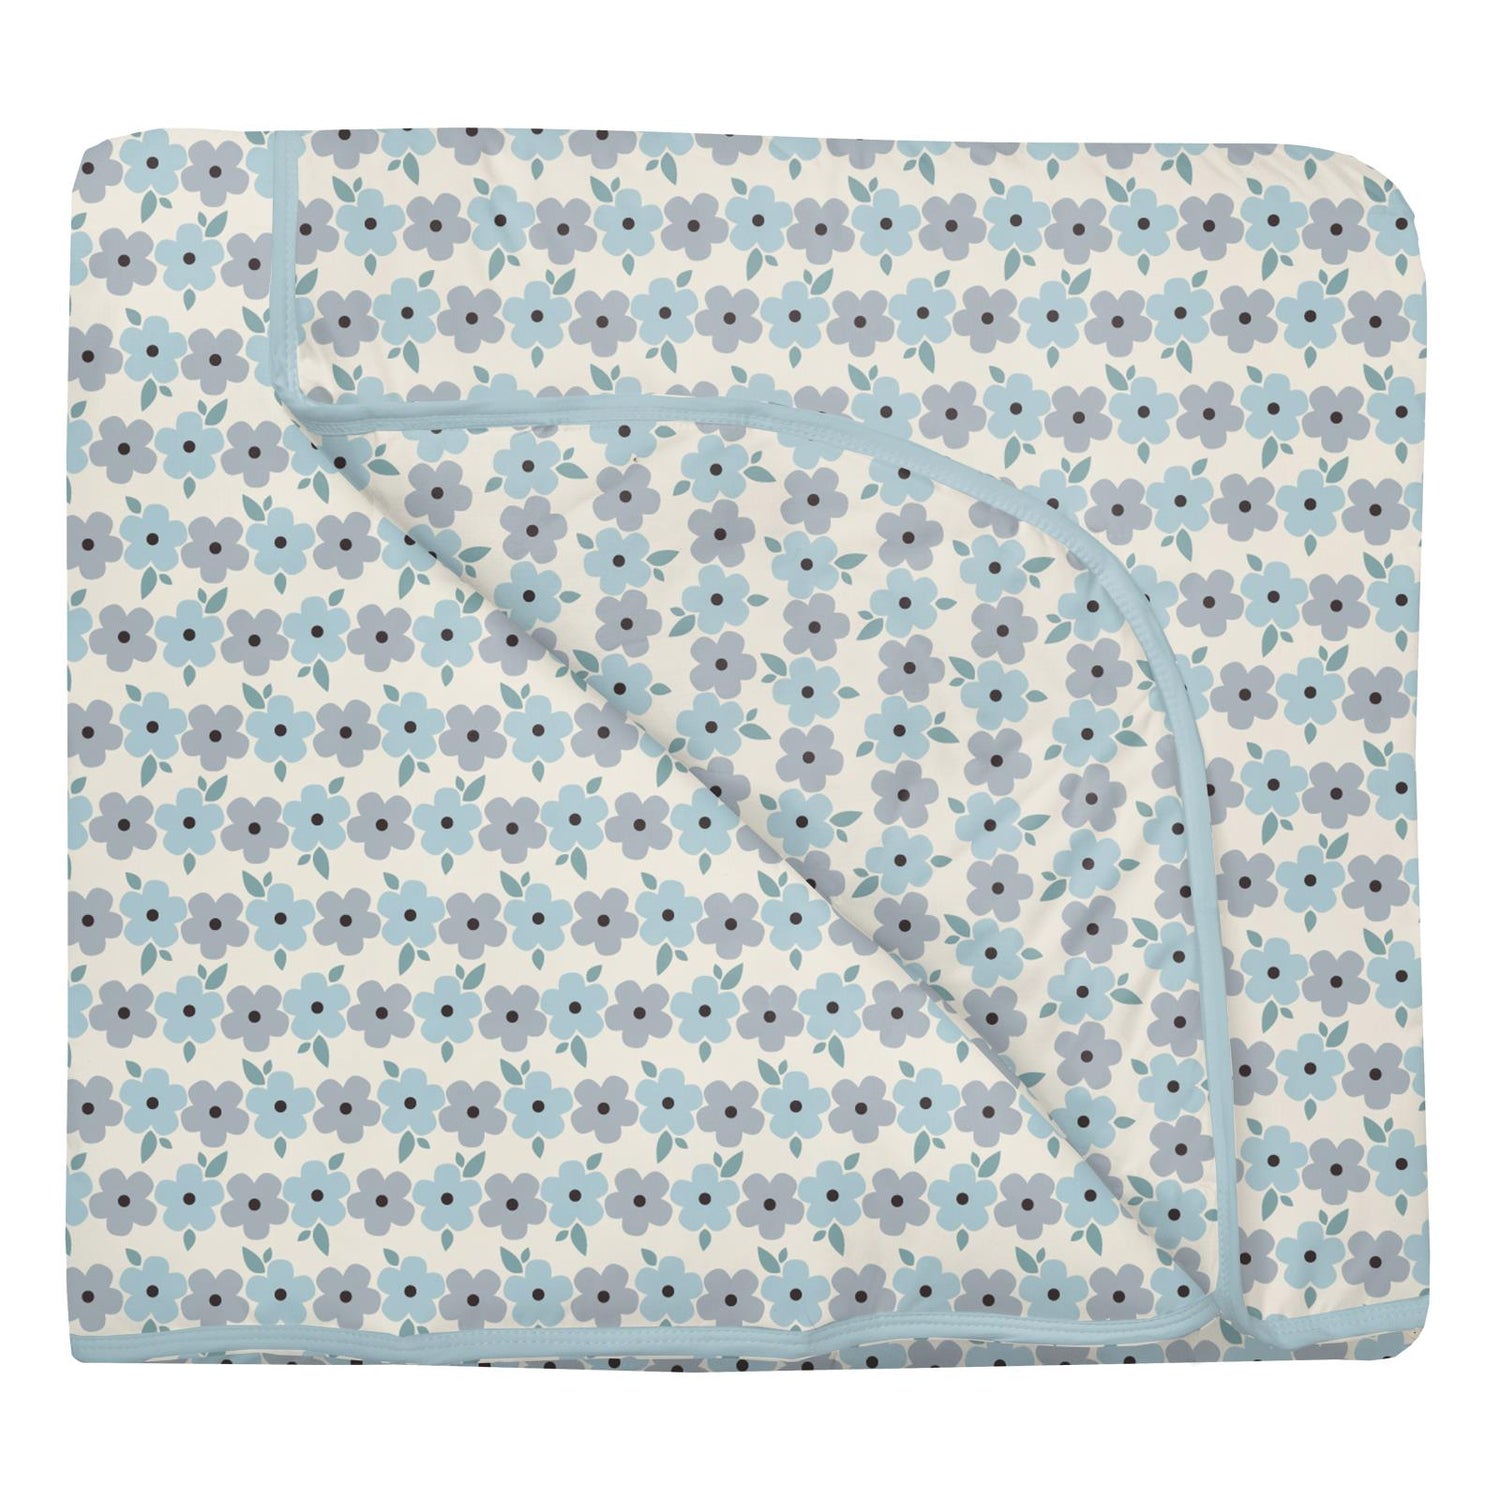 Print Fluffle Toddler Blanket in Natural Hydrangea